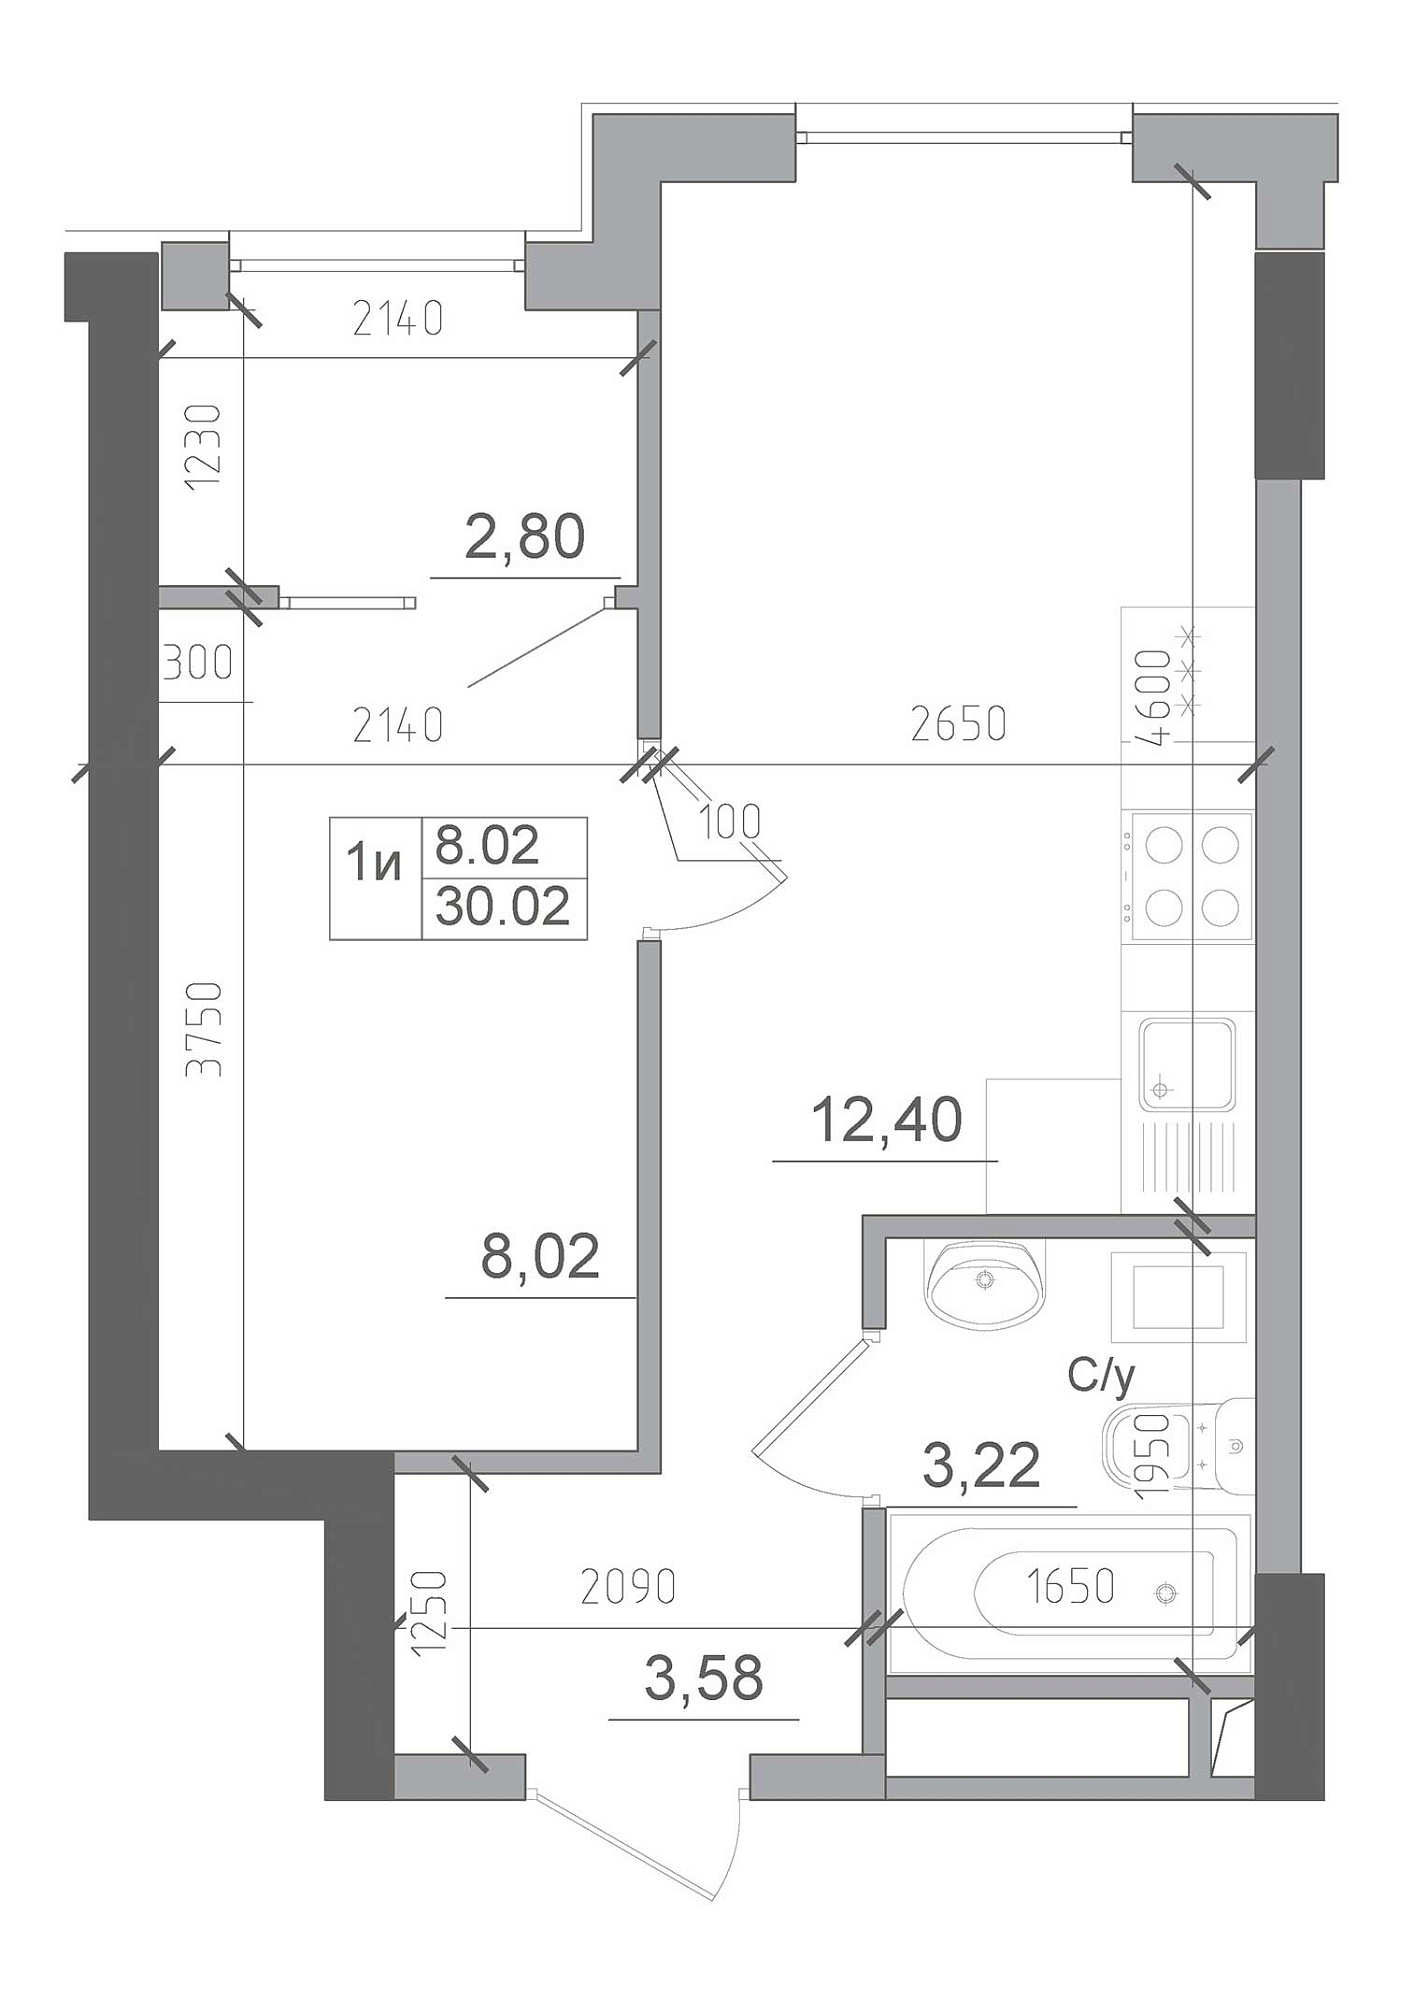 Planning 1-rm flats area 30.02m2, AB-22-10/00014.